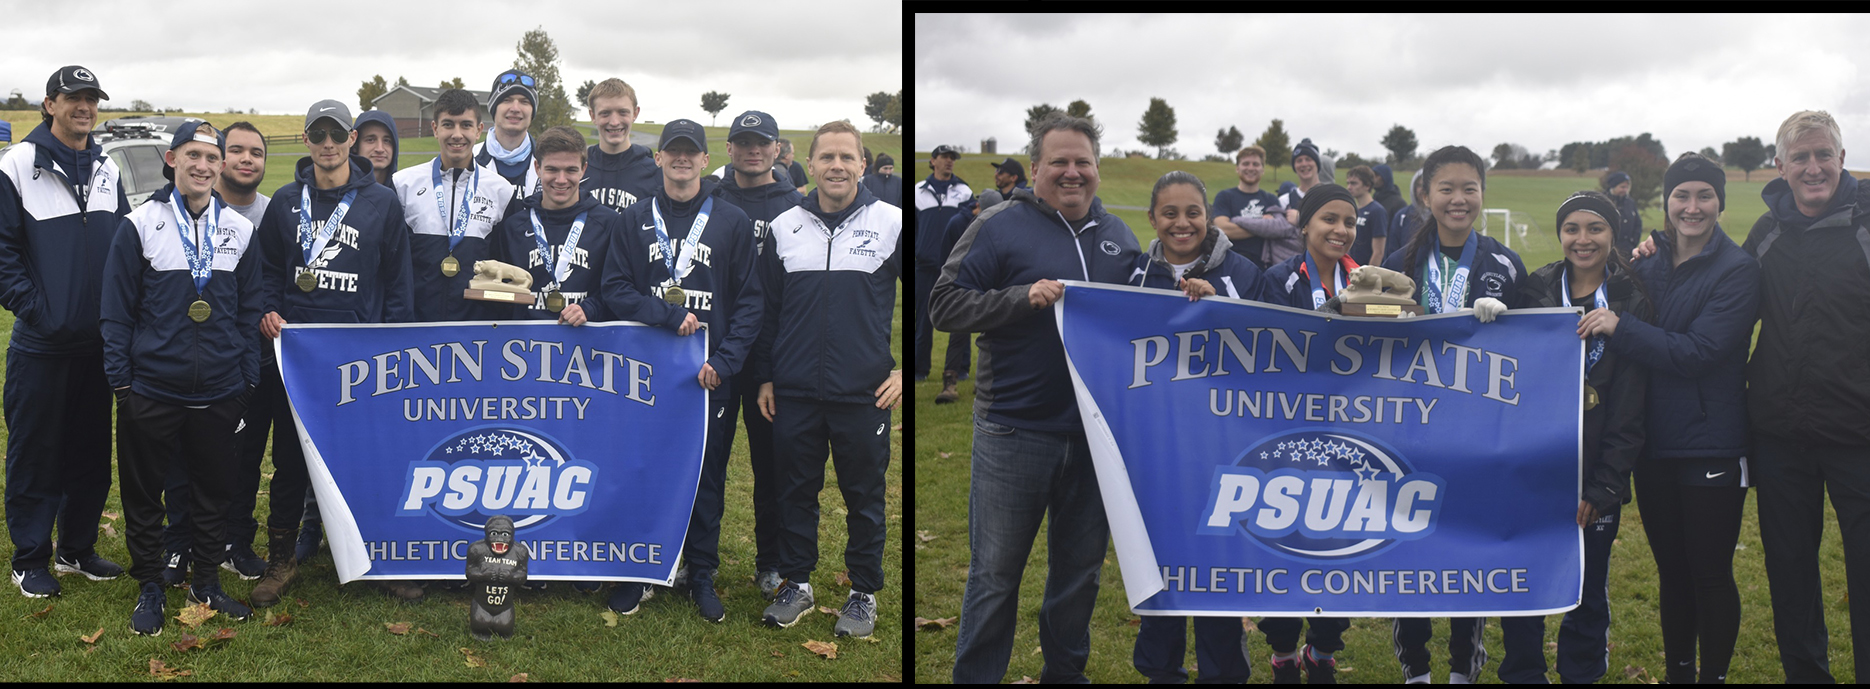 Penn State Fayette Men's Cross Country (L) and Schuylkill Women's Cross Country (R), the 2018 PSUAC Cross Country Champions.